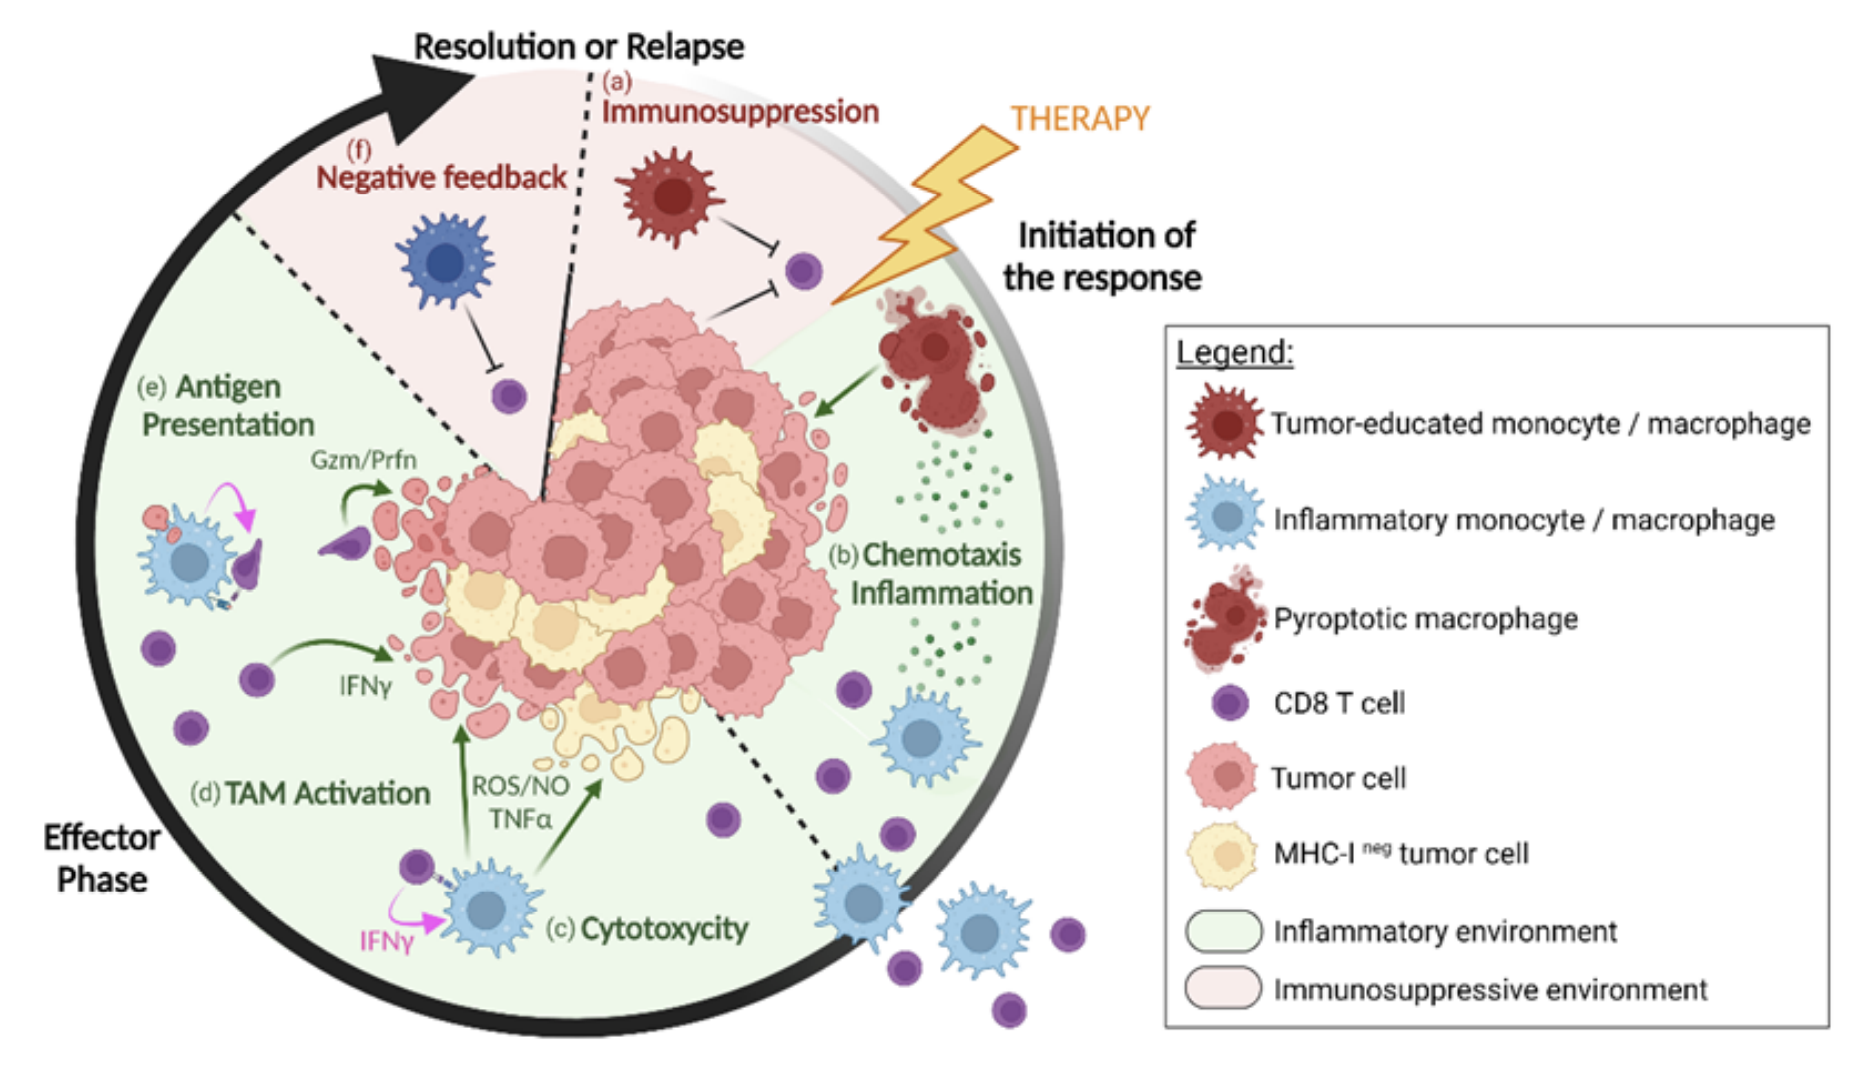 Diagram showing the different levels of cooperation between monocytes/macrophages and CD8+ T cells in regressing tumors after immunotherapy. In progressing tumors, tumor-educated macrophages contribute to inhibiting CD8+ T-cell activities (a). Upon immunotherapy, macrophages release inflammatory cytokines and chemokines (b), concomitant with macrophage pyroptosis. It attracts and guides new myeloid cells and CD8+ T cells to infiltrate the inflamed tumor. Monocytes/macrophages can also kill tumor cells (c) following activation by IFN-γ-producing CD8+ T cells (d), and some subsets might locally reactivate the CD8+ T cells through antigen cross-presentation (e), increasing the probability of tumor cell killing. As the tumor regresses, a natural negative feedback loop (f) that goes along with the activation of effector cells, progressively terminates the immune response. Credit: Vermare A, et al. Dynamic CD8+ T cell cooperation with macrophages and monocytes for successful cancer immunotherapy. Cancers 14: 3546 (2022). https://doi.org/10.3390/cancers14143546. (CC BY 4.0).